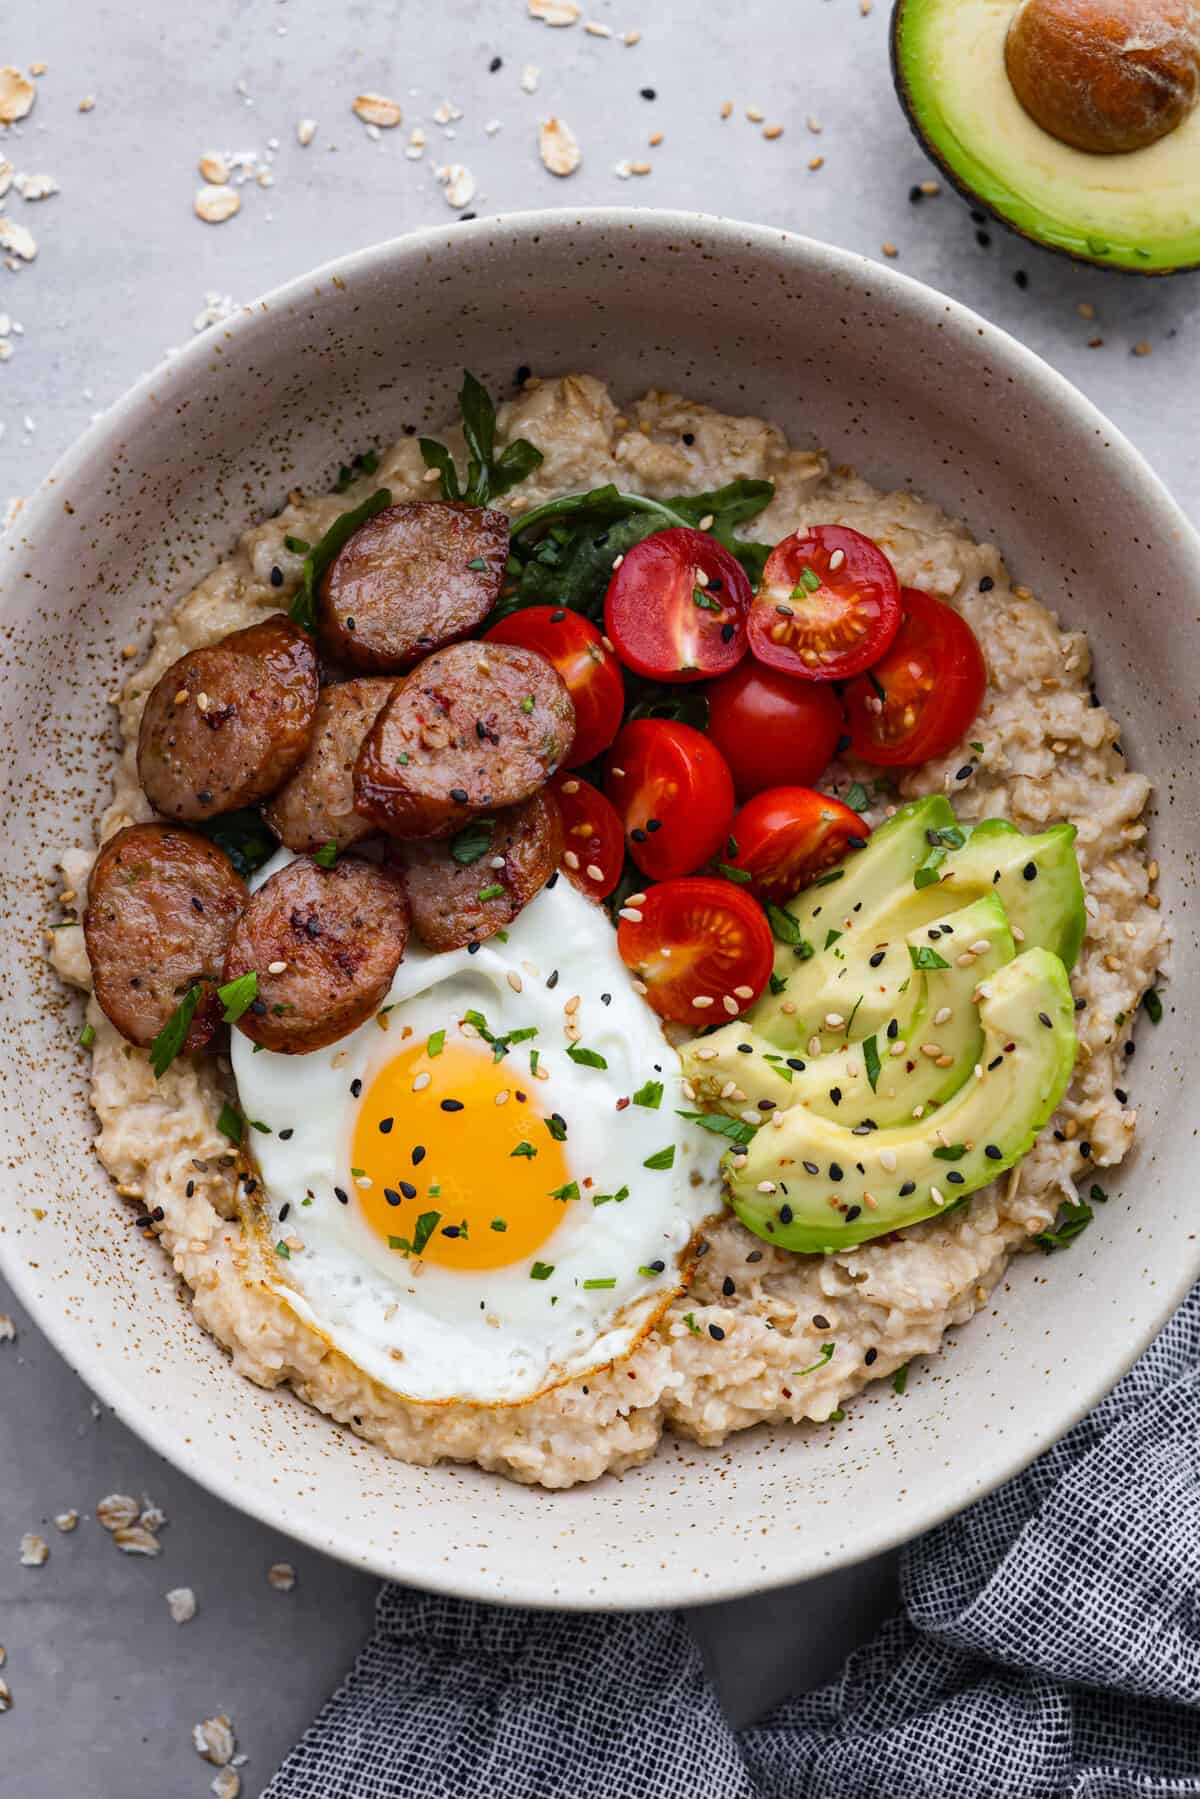 Savory oatmeal topped with a fried egg, tomatoes and chicken sausage.